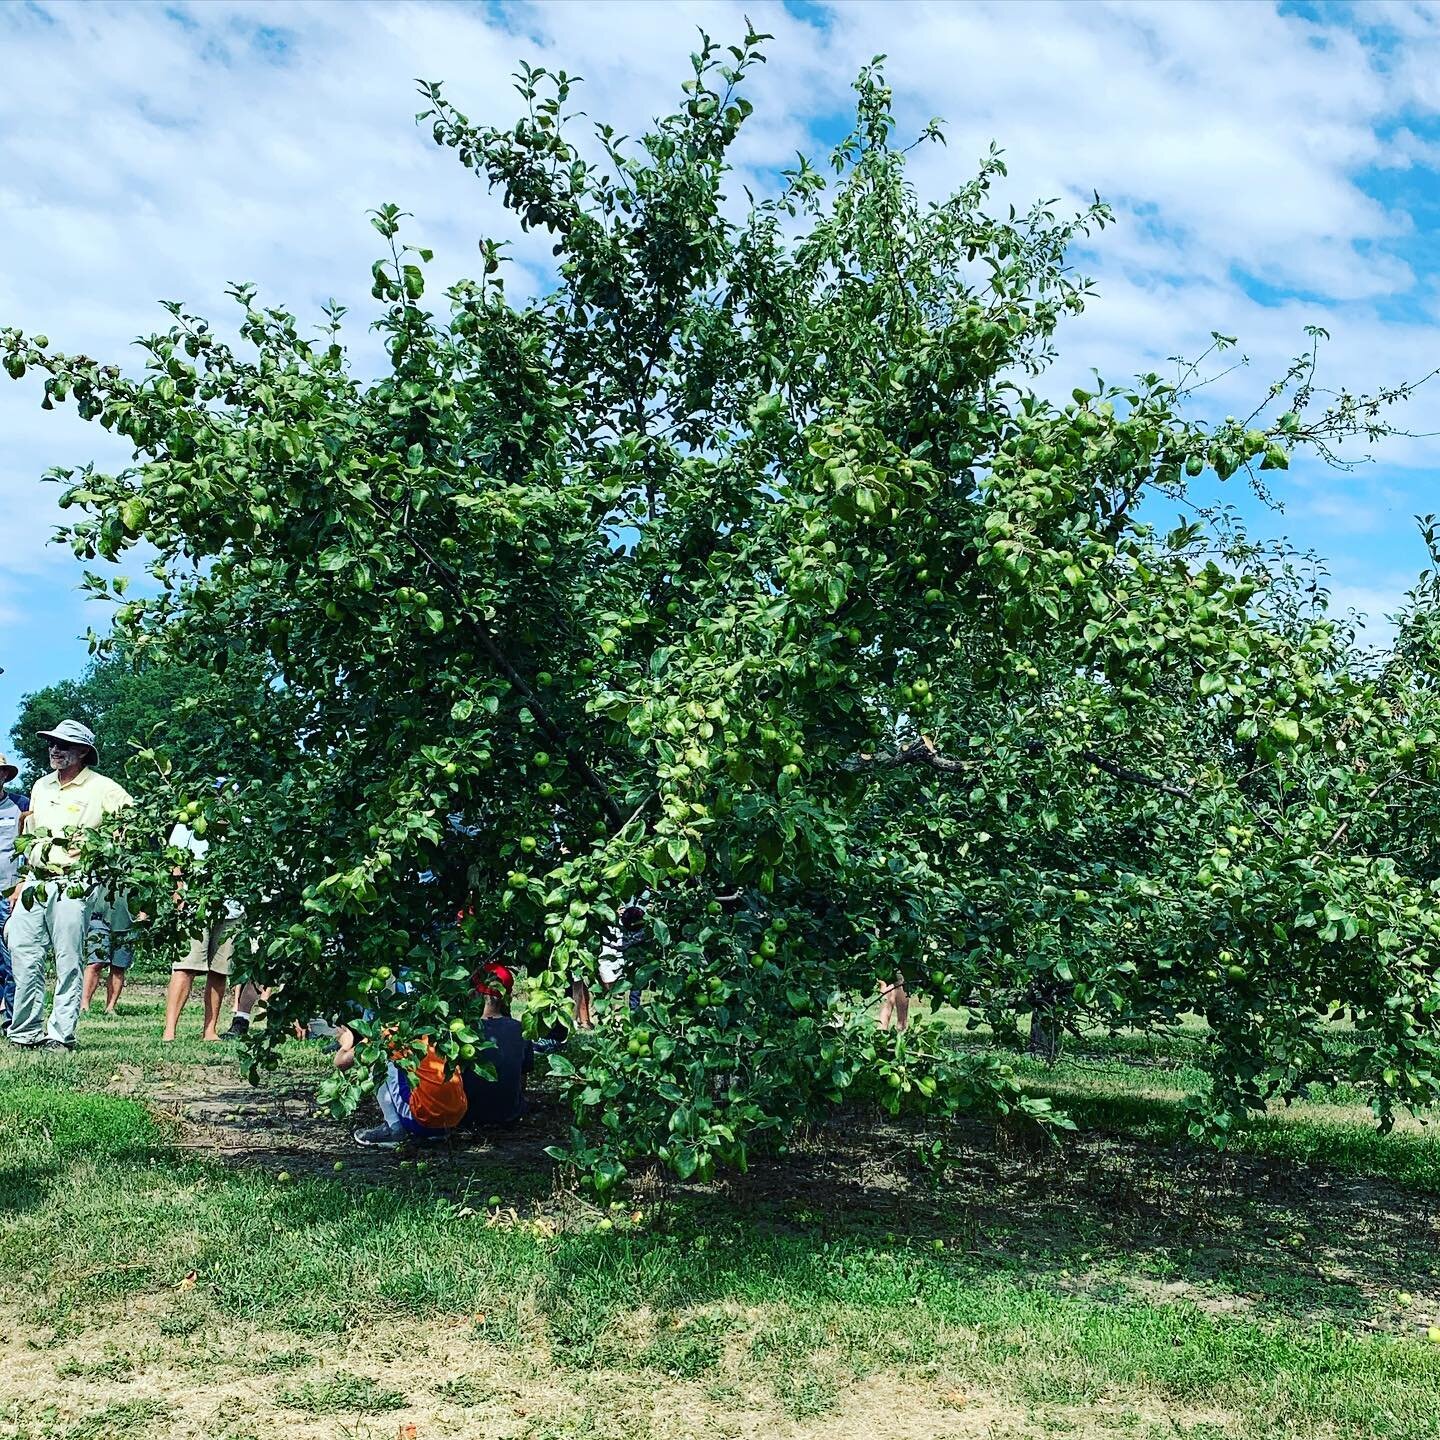 Just another apple tree? NO! This is the world&rsquo;s oldest honeycrisp tree. Seen during the 2022 summer tour presented by Minnesota Apple Growers Association. We will share more about this fun day soon!